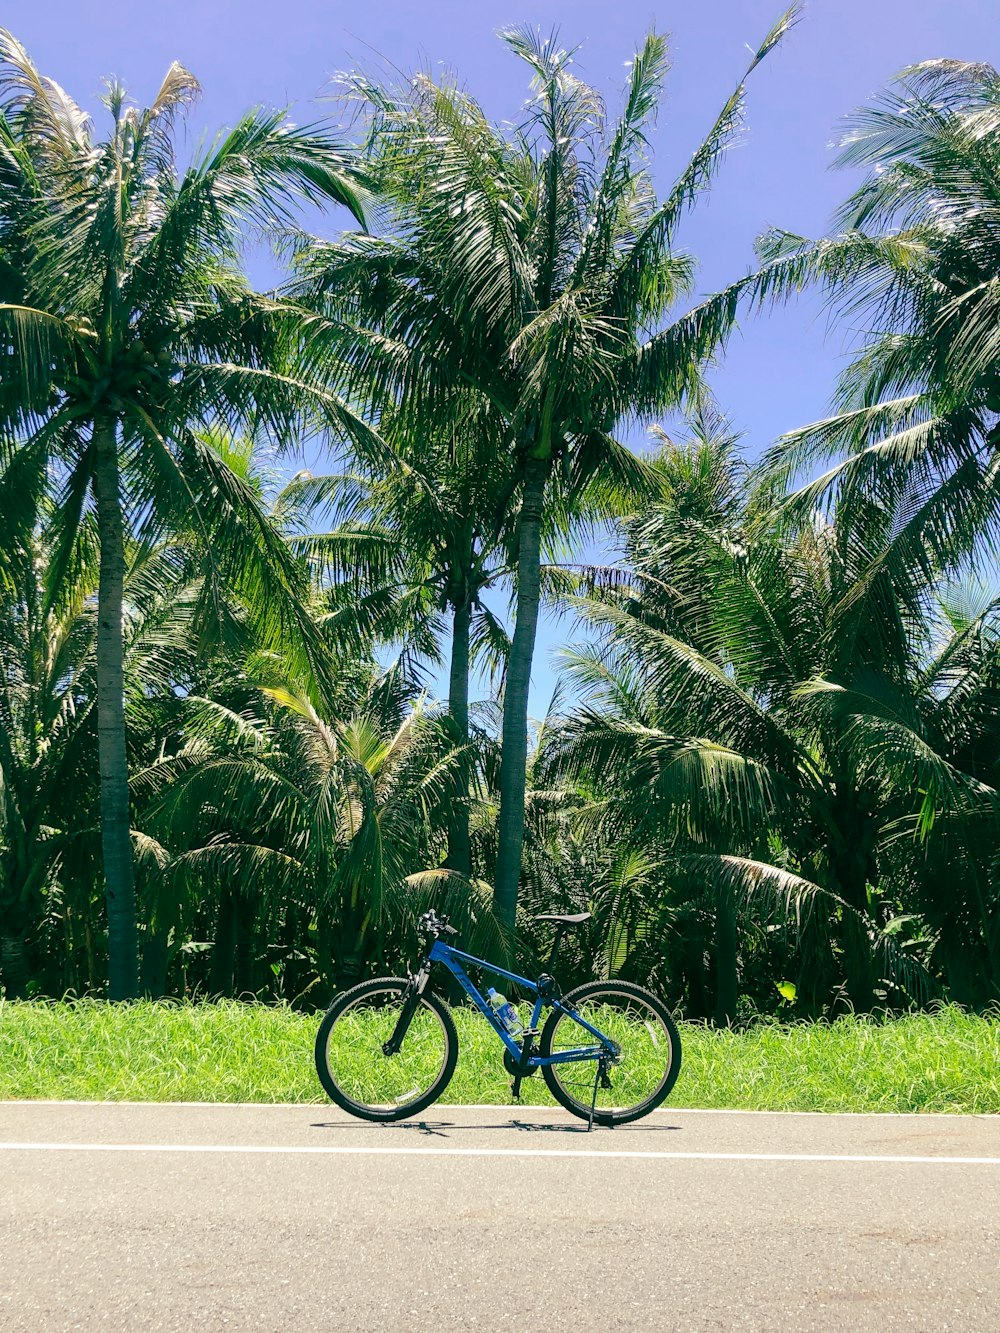 a bicycle parked on the side of the road